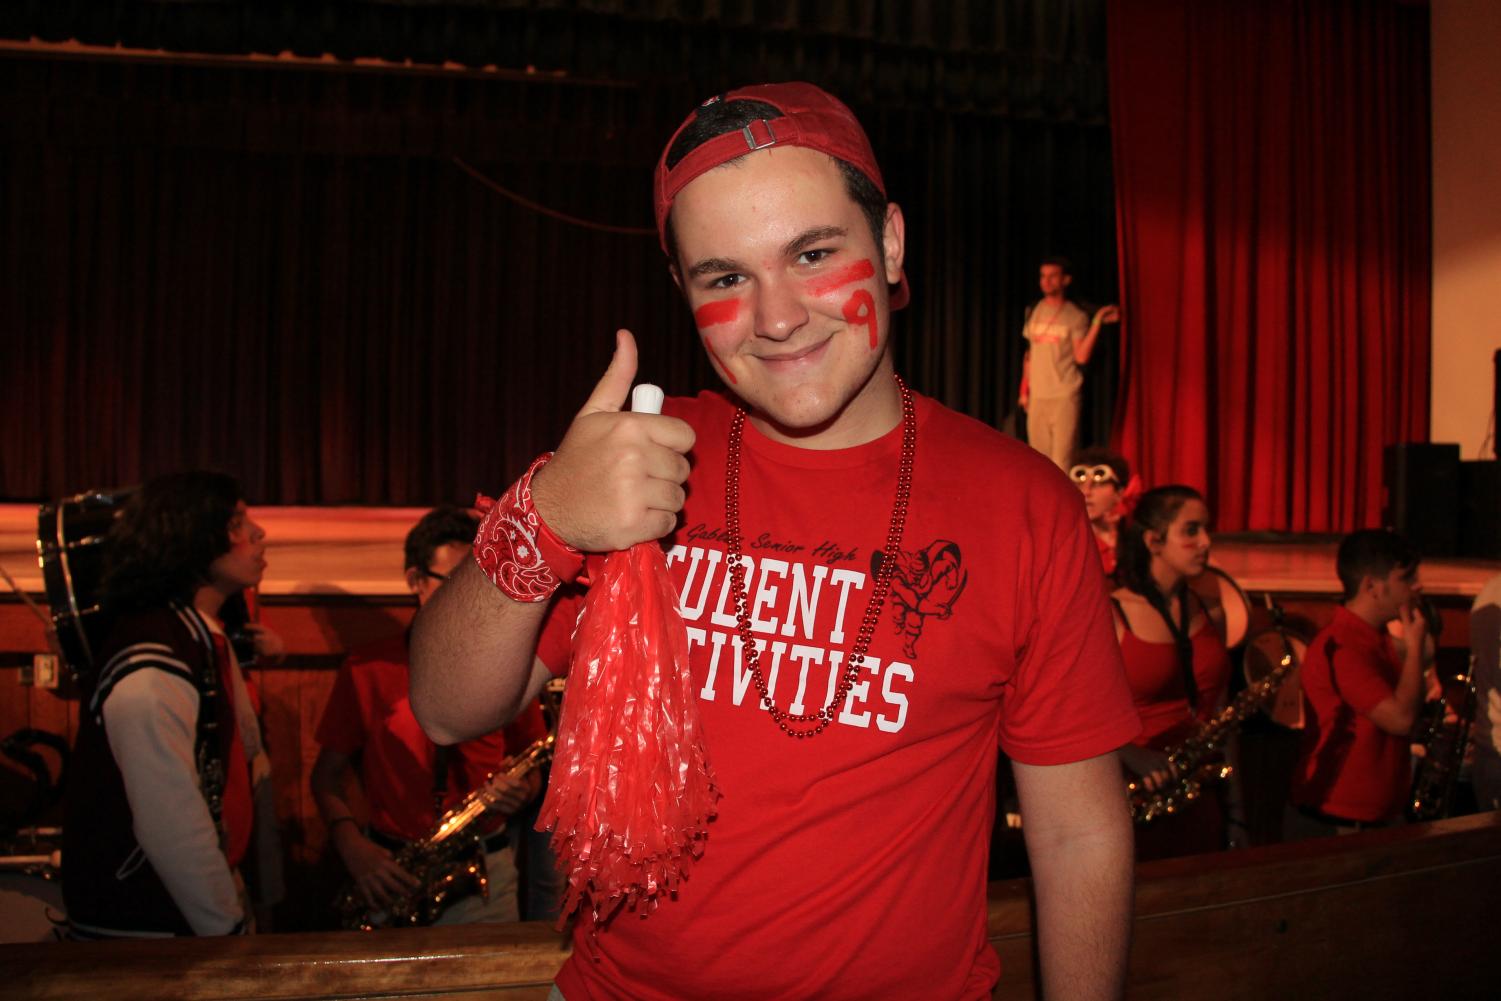 Decked+in+Red+for+the+Senior+Pep+Rally%21